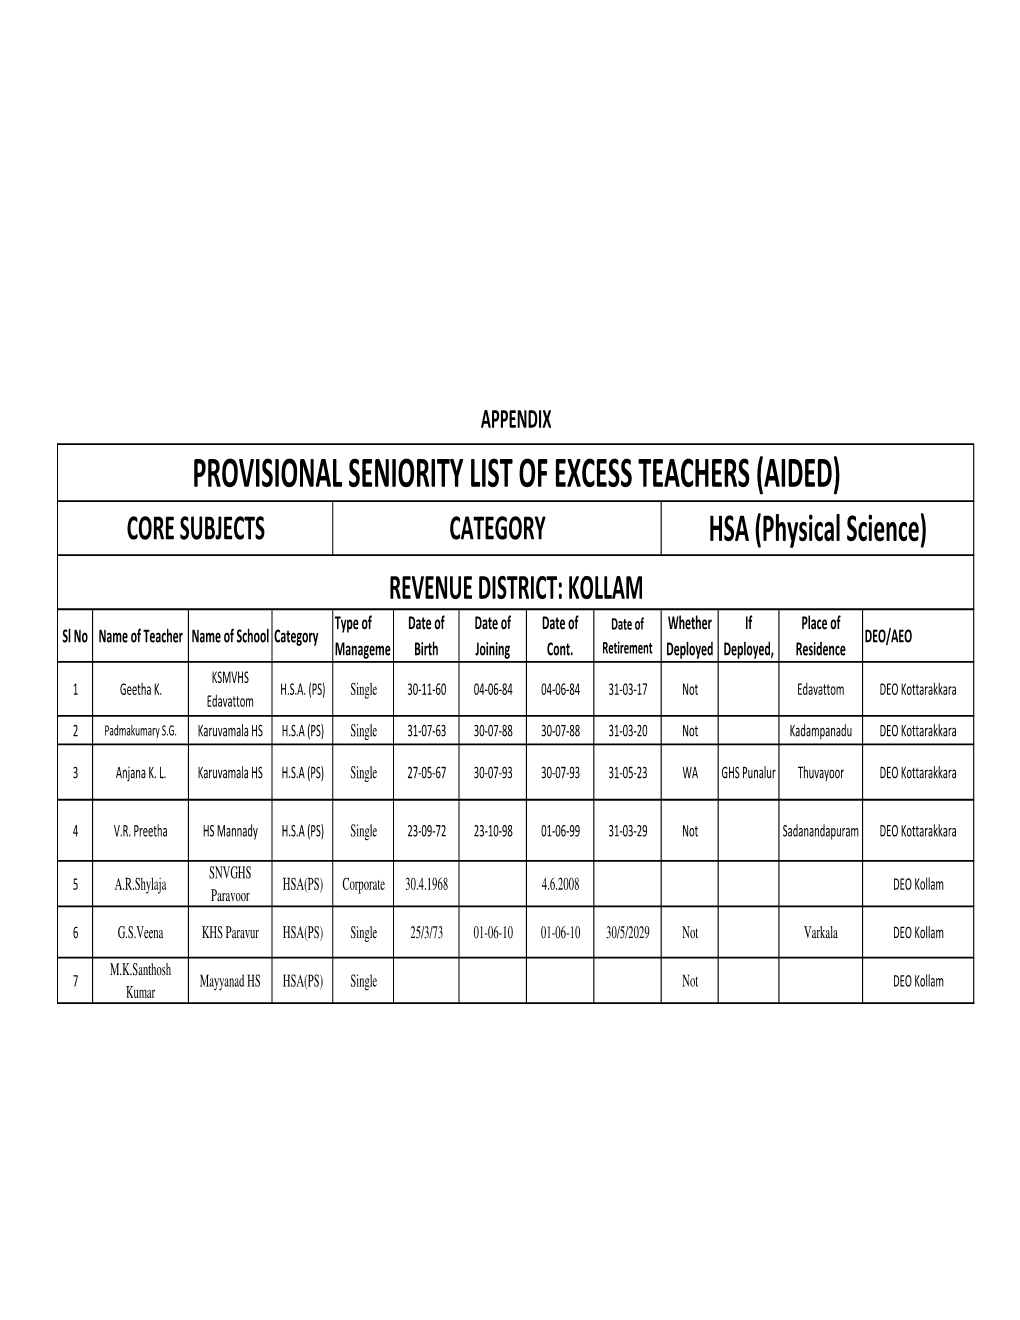 Provisional Seniority List of Excess Teachers (Aided)